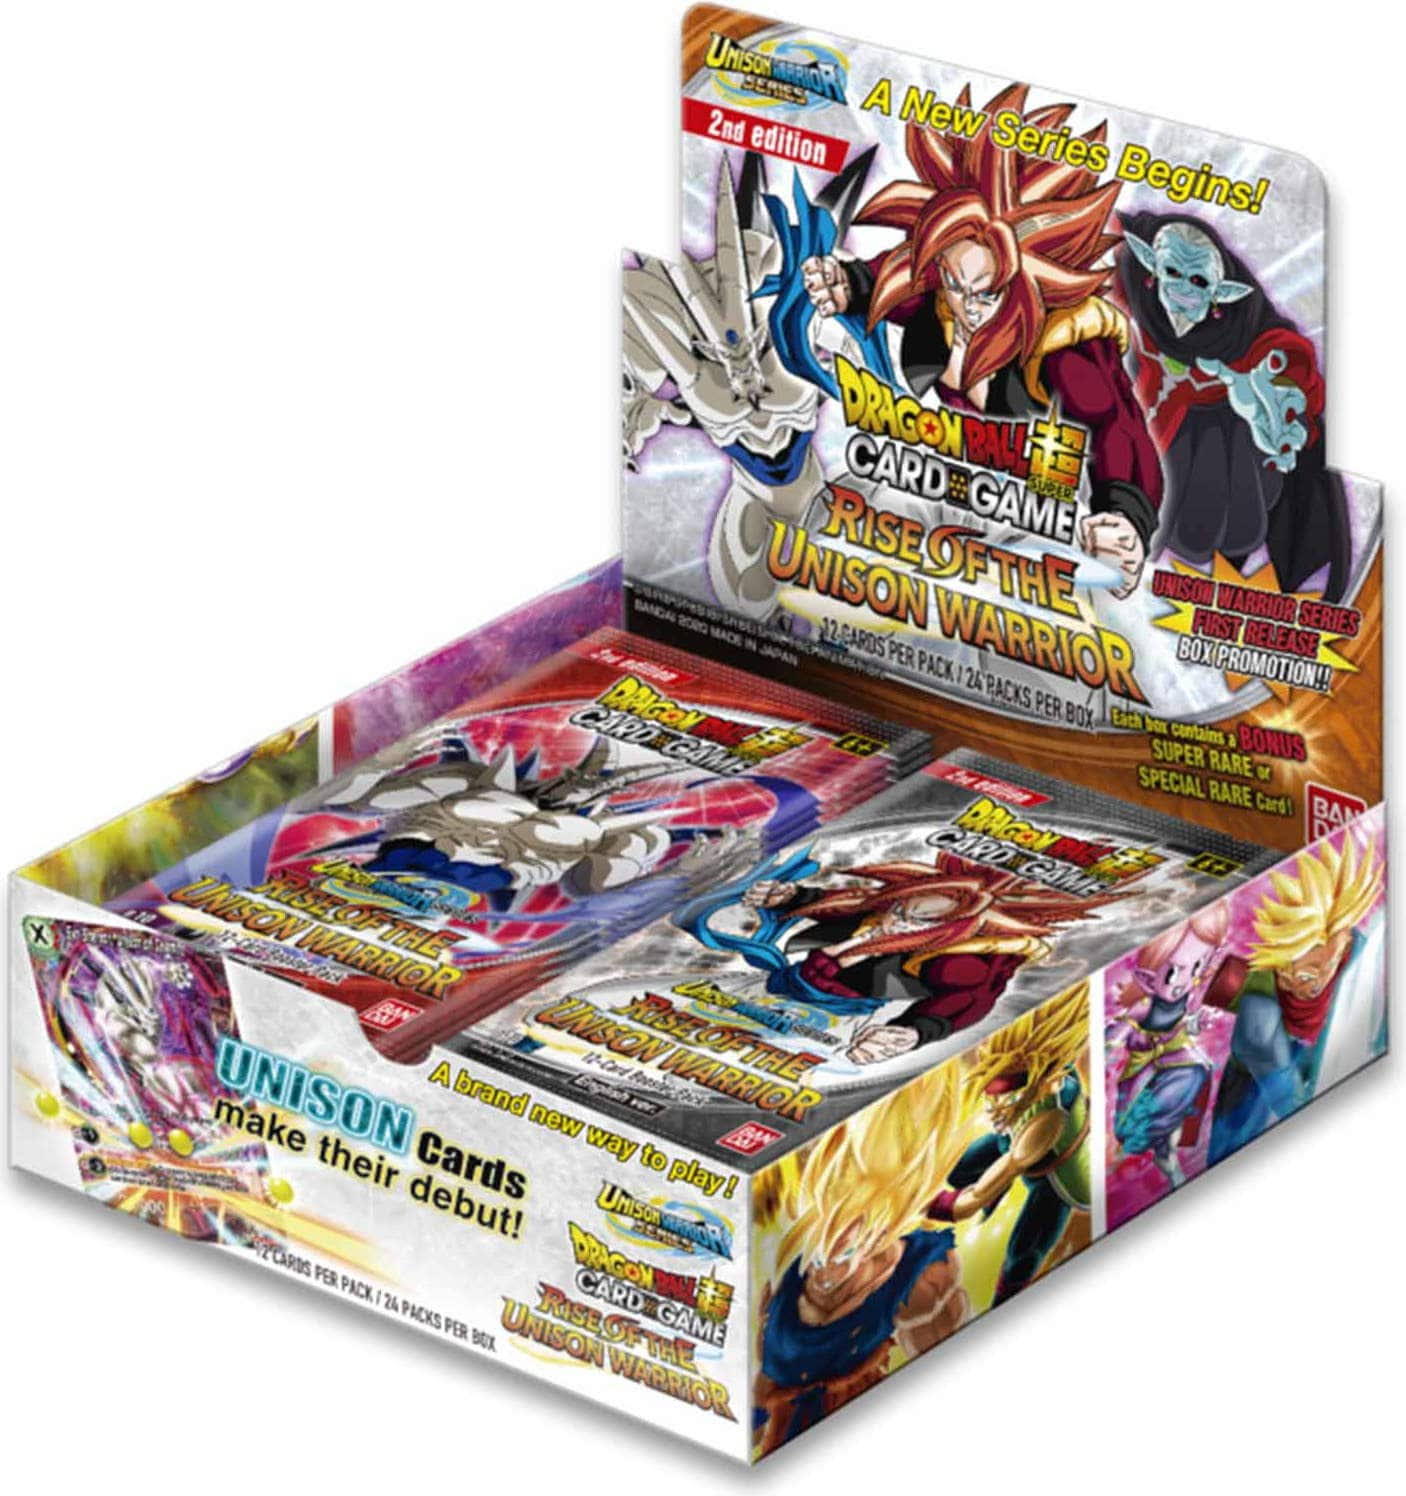 Dragon Ball Super Rise of The Unison Warrior 2nd Edition Booster Box